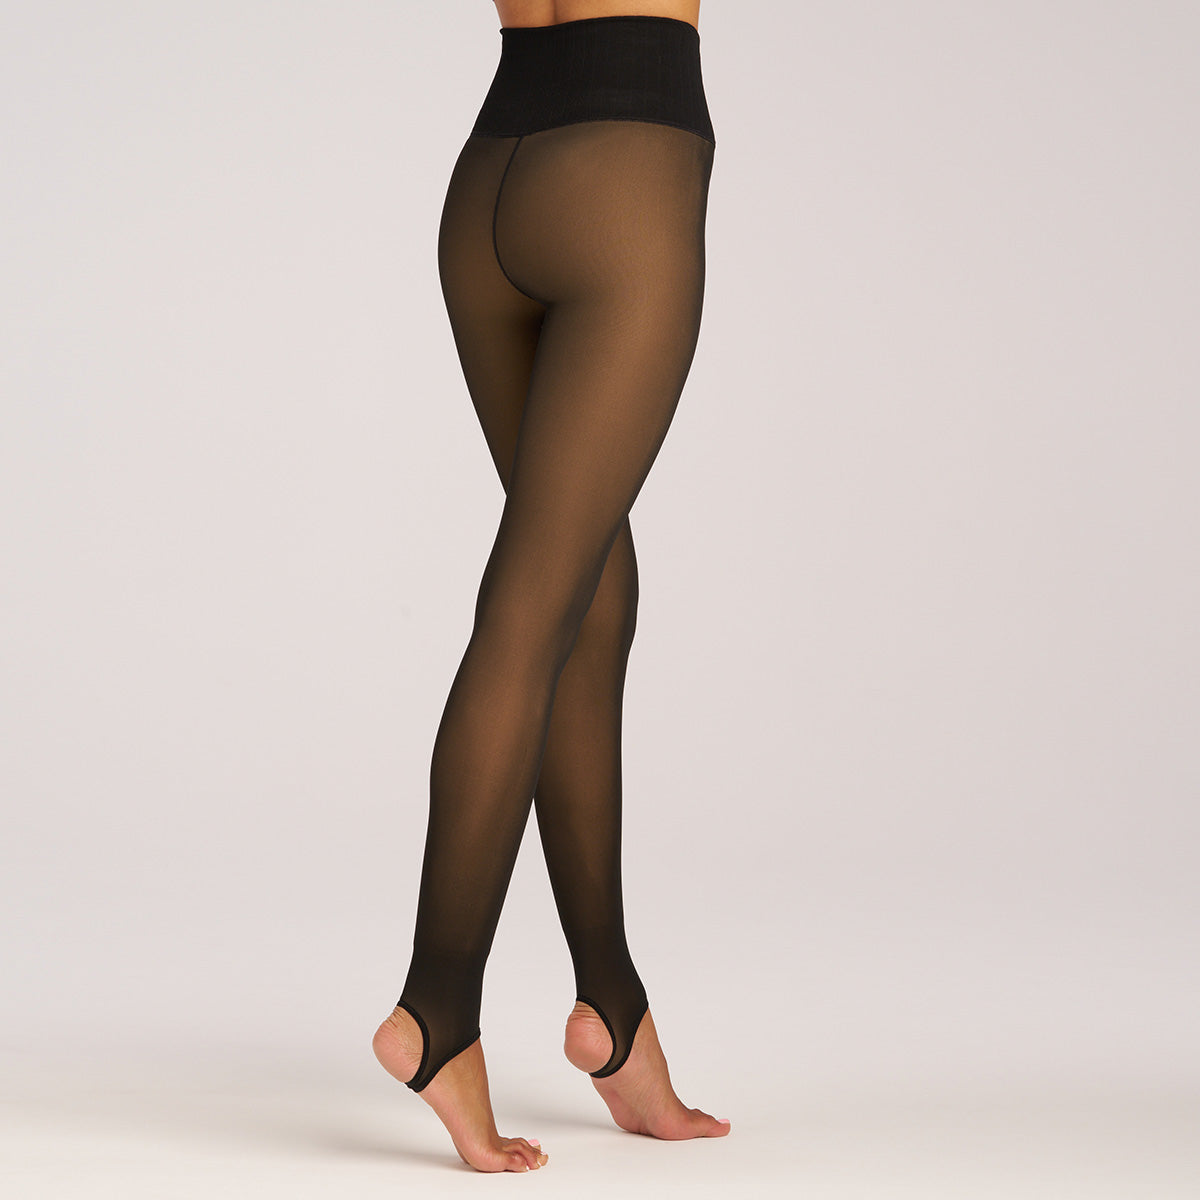 Faux transparent fleece lined tights without u shaped seam in back :  r/findfashion